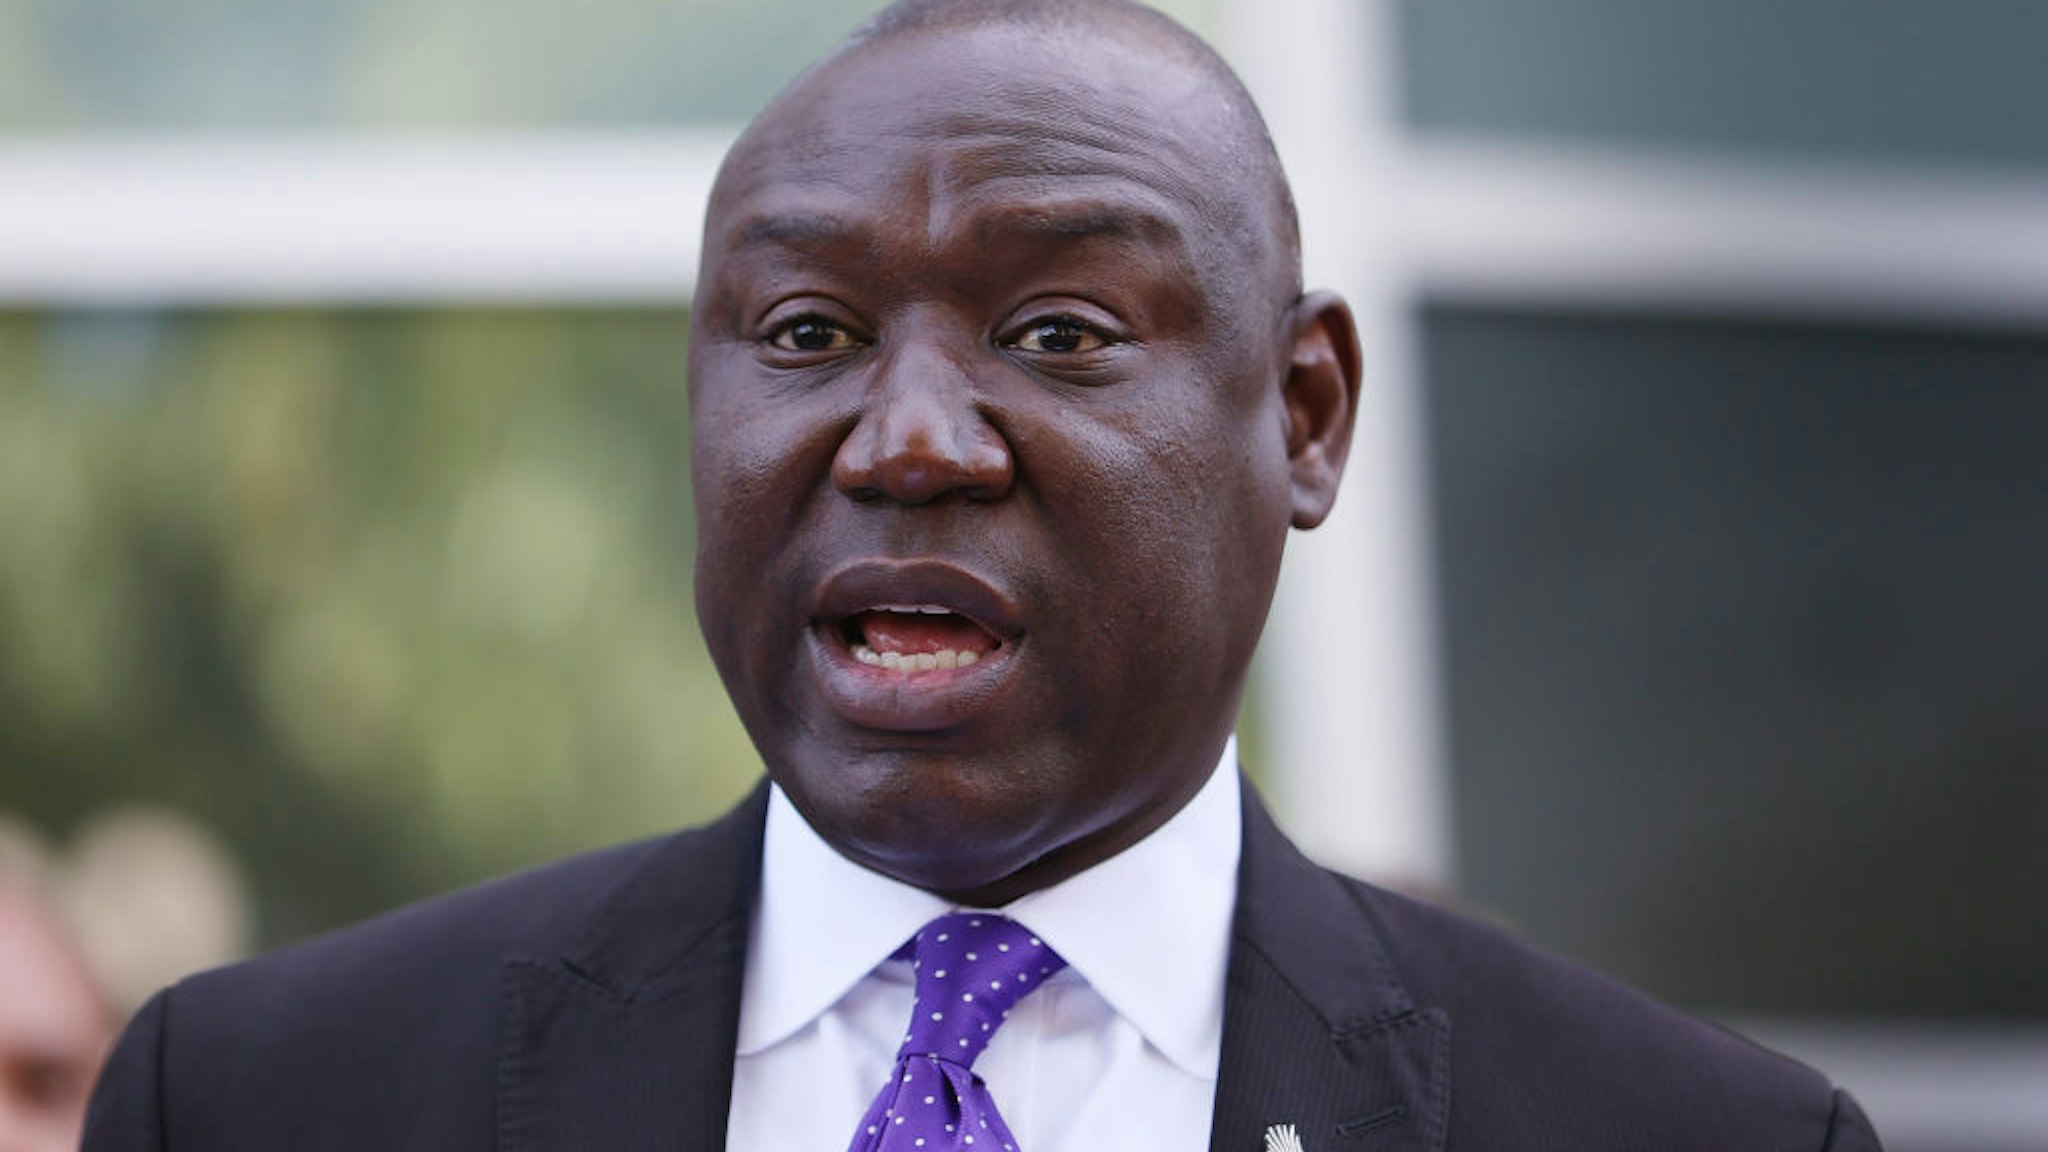 Benjamin Crump, one of the lawyers representing the family of Andrew Brown Jr., speaks during a press conference on April 27, 2021 in Elizabeth City, North Carolina.